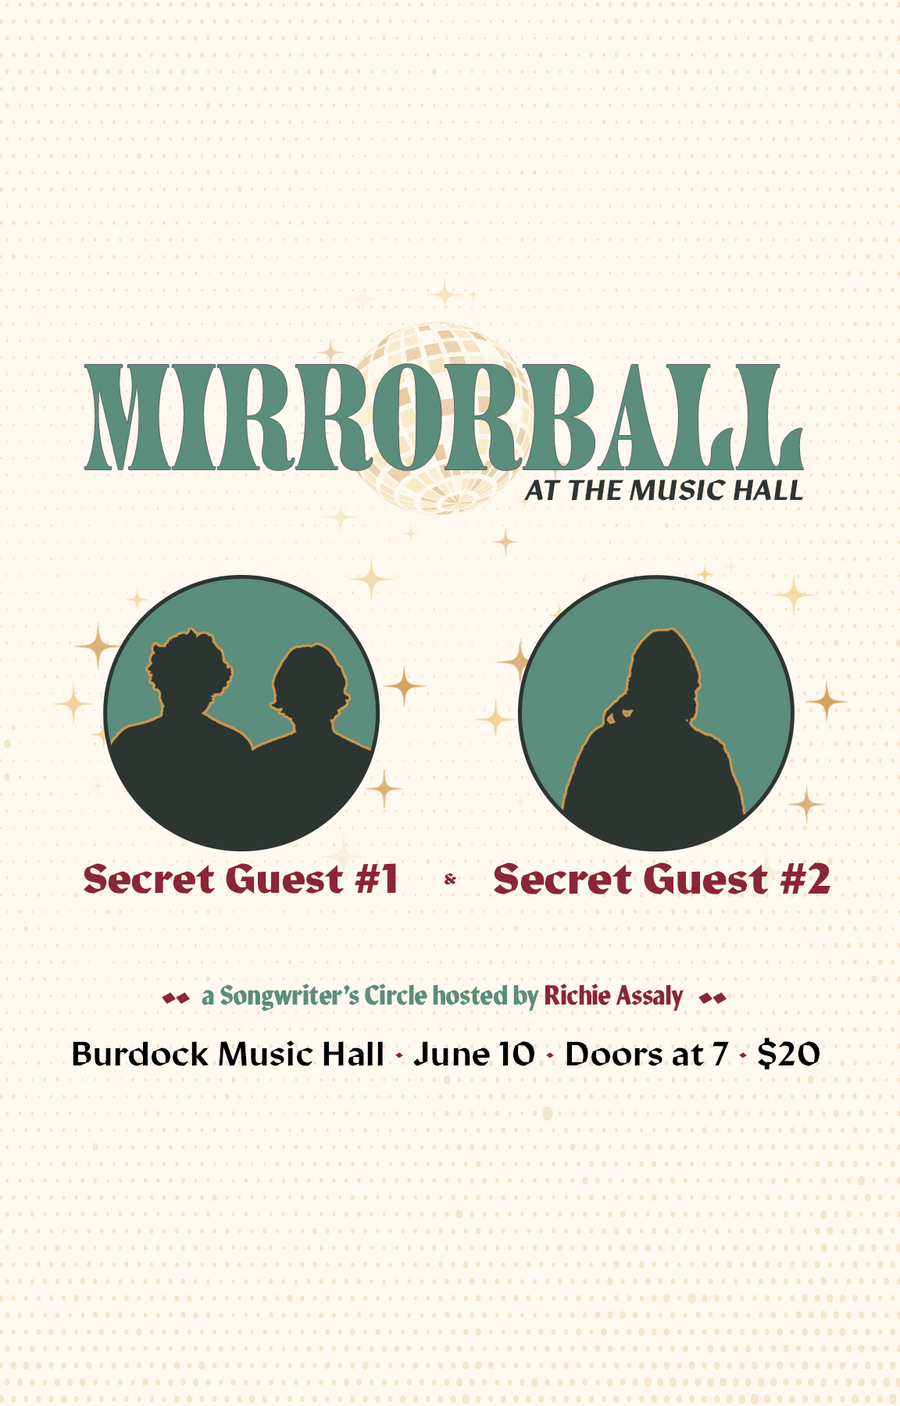 Mirrorball at the Music Hall